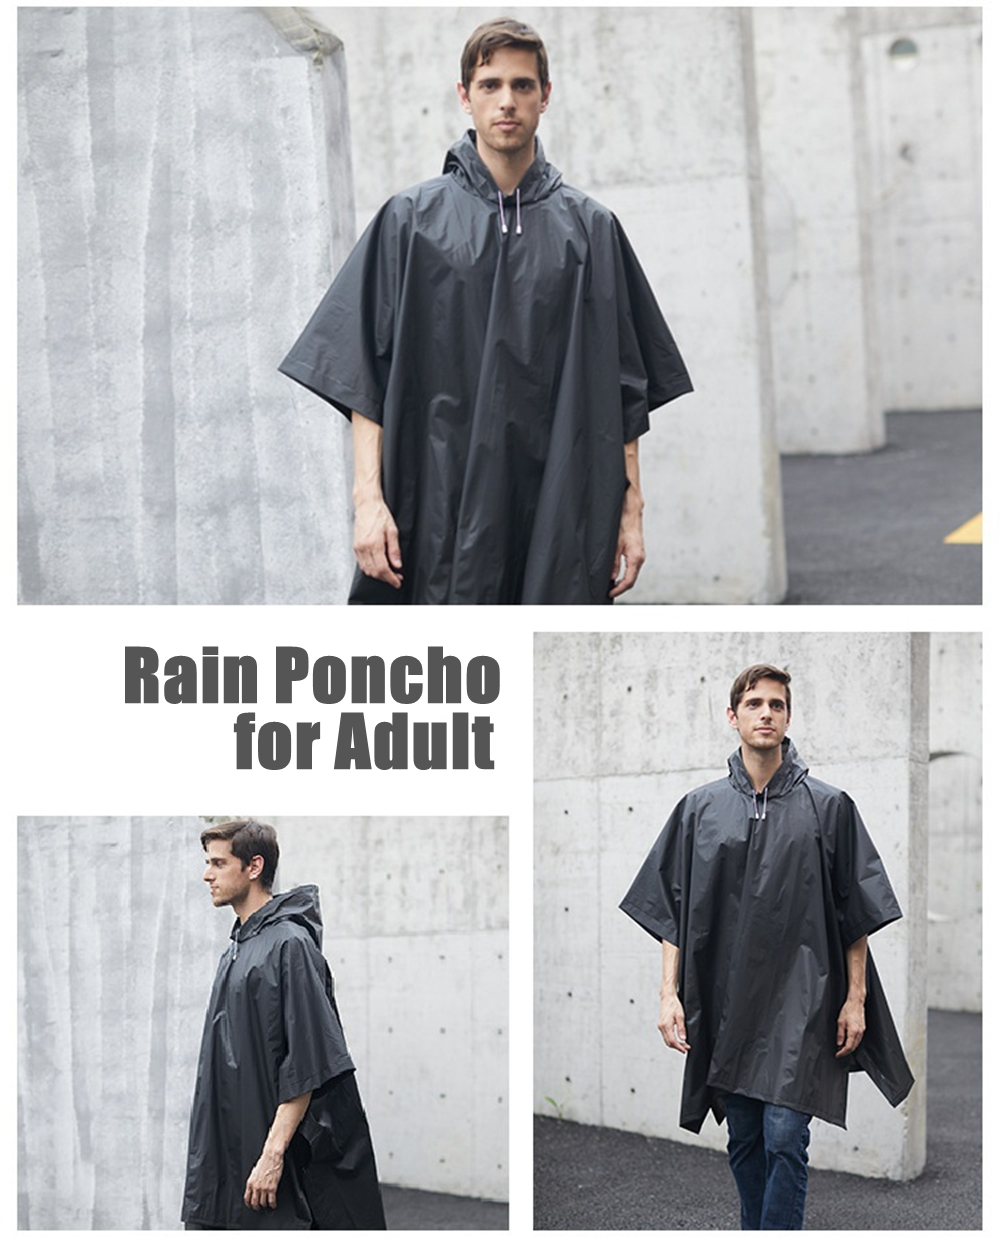 stay dry and comfy in the rain reusable raincoats for kids and adults perfect for disneyland details 4